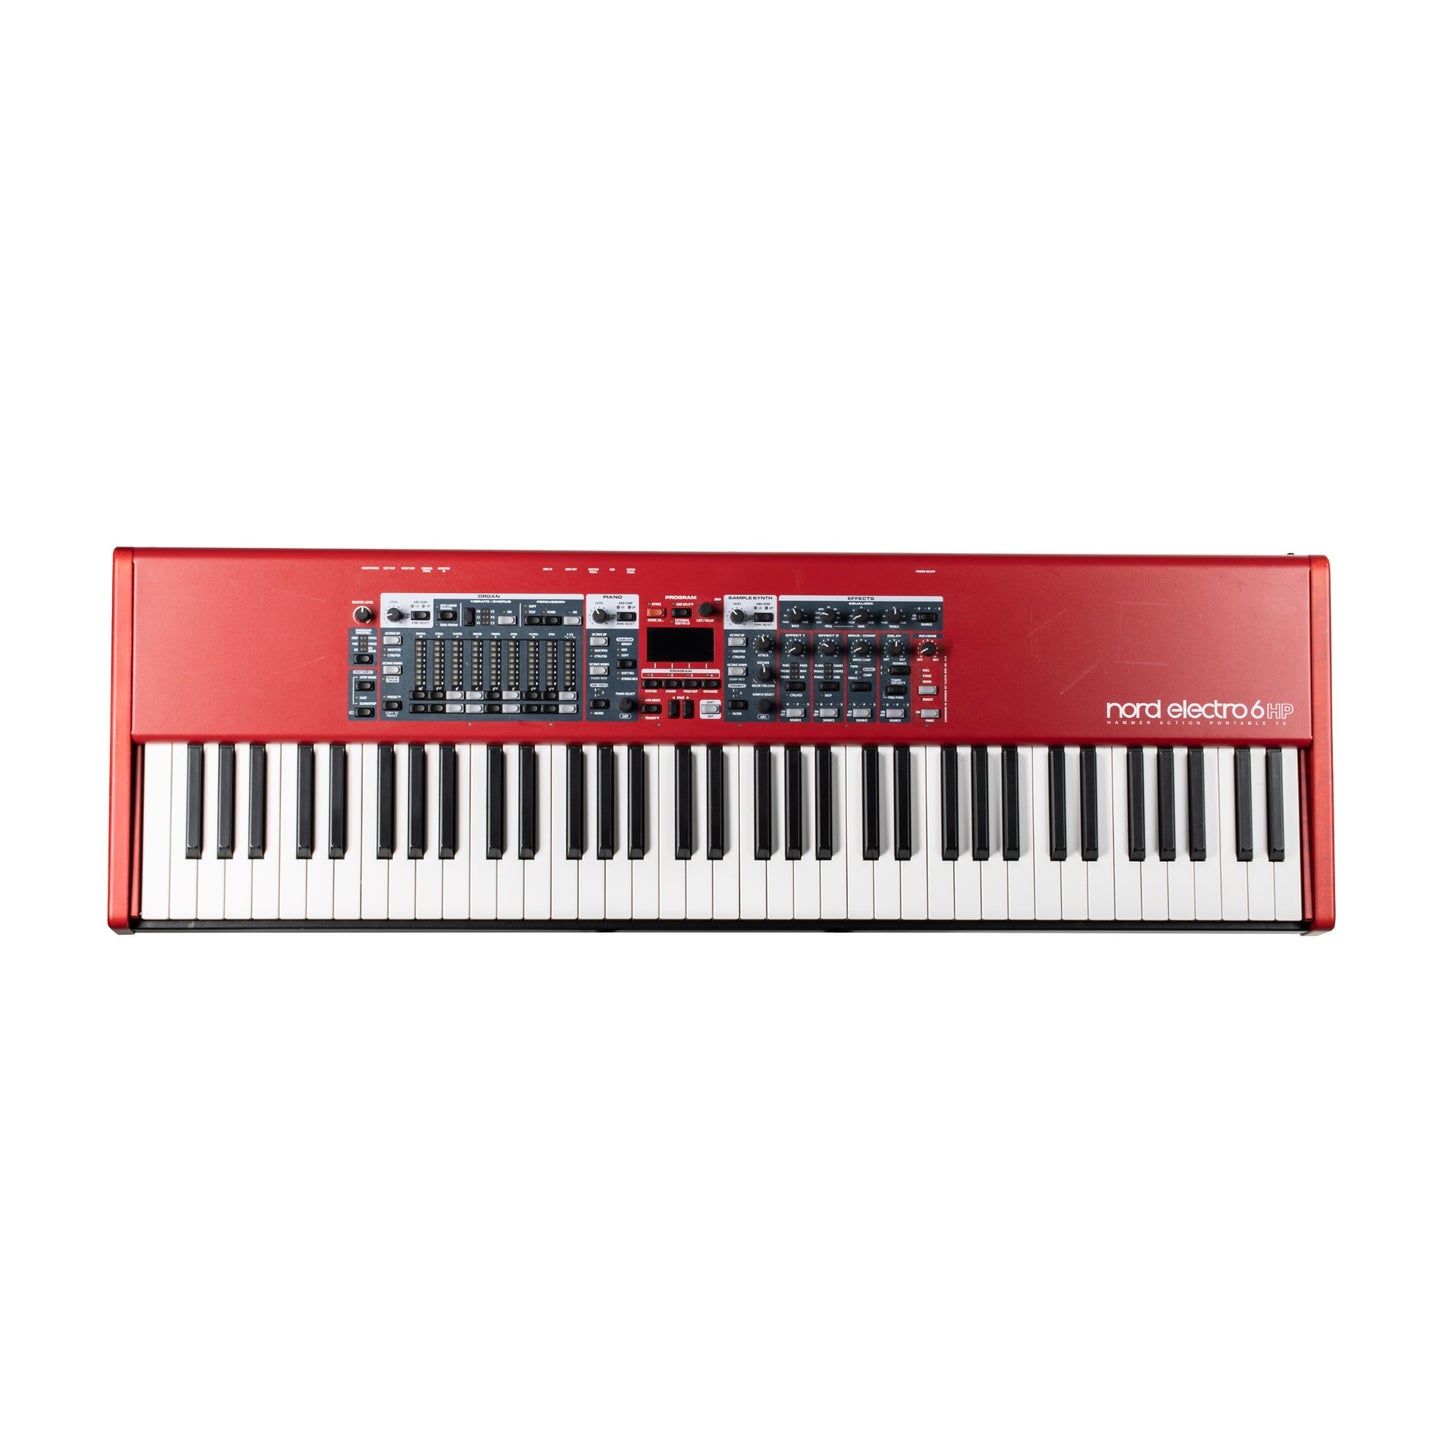 Nord Electro 6 HP73 Keyboard 73-note Hammer Action Portable Keybed